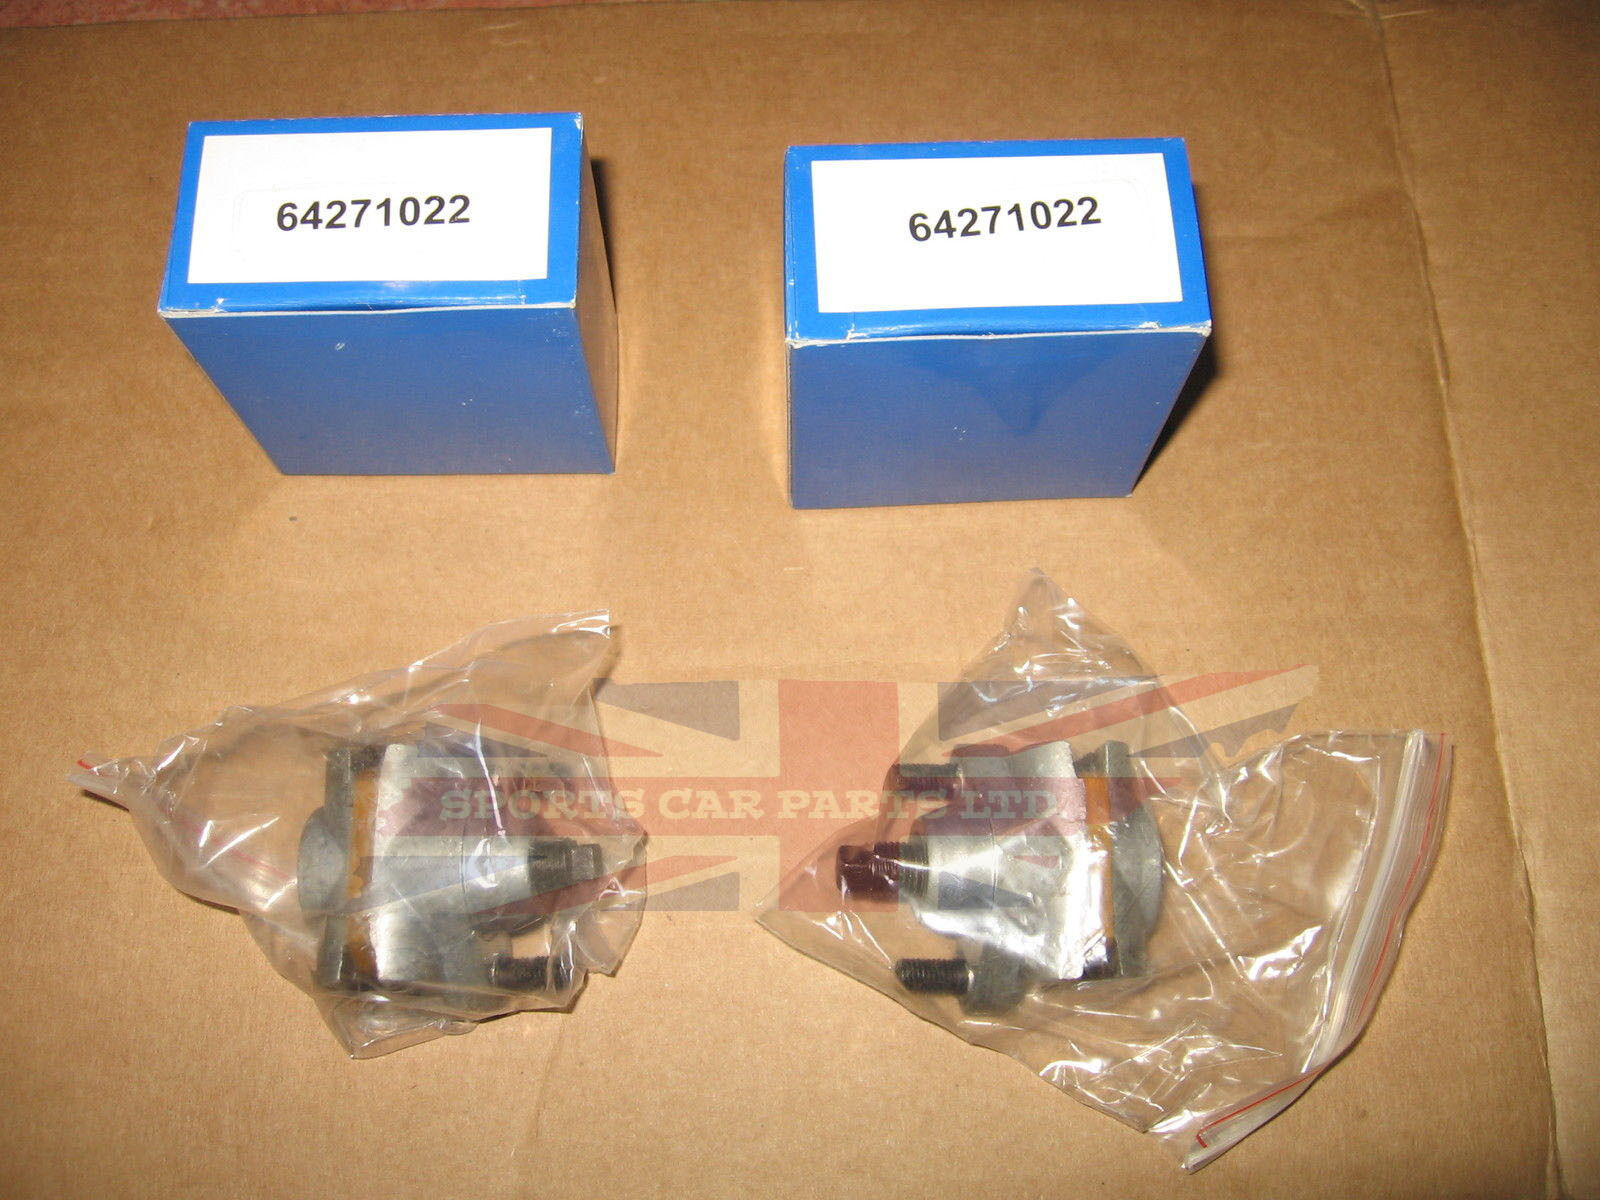 Pair of New Rear Brake Adjusters  for Triumph TR6 Spitfire GT6 TR4